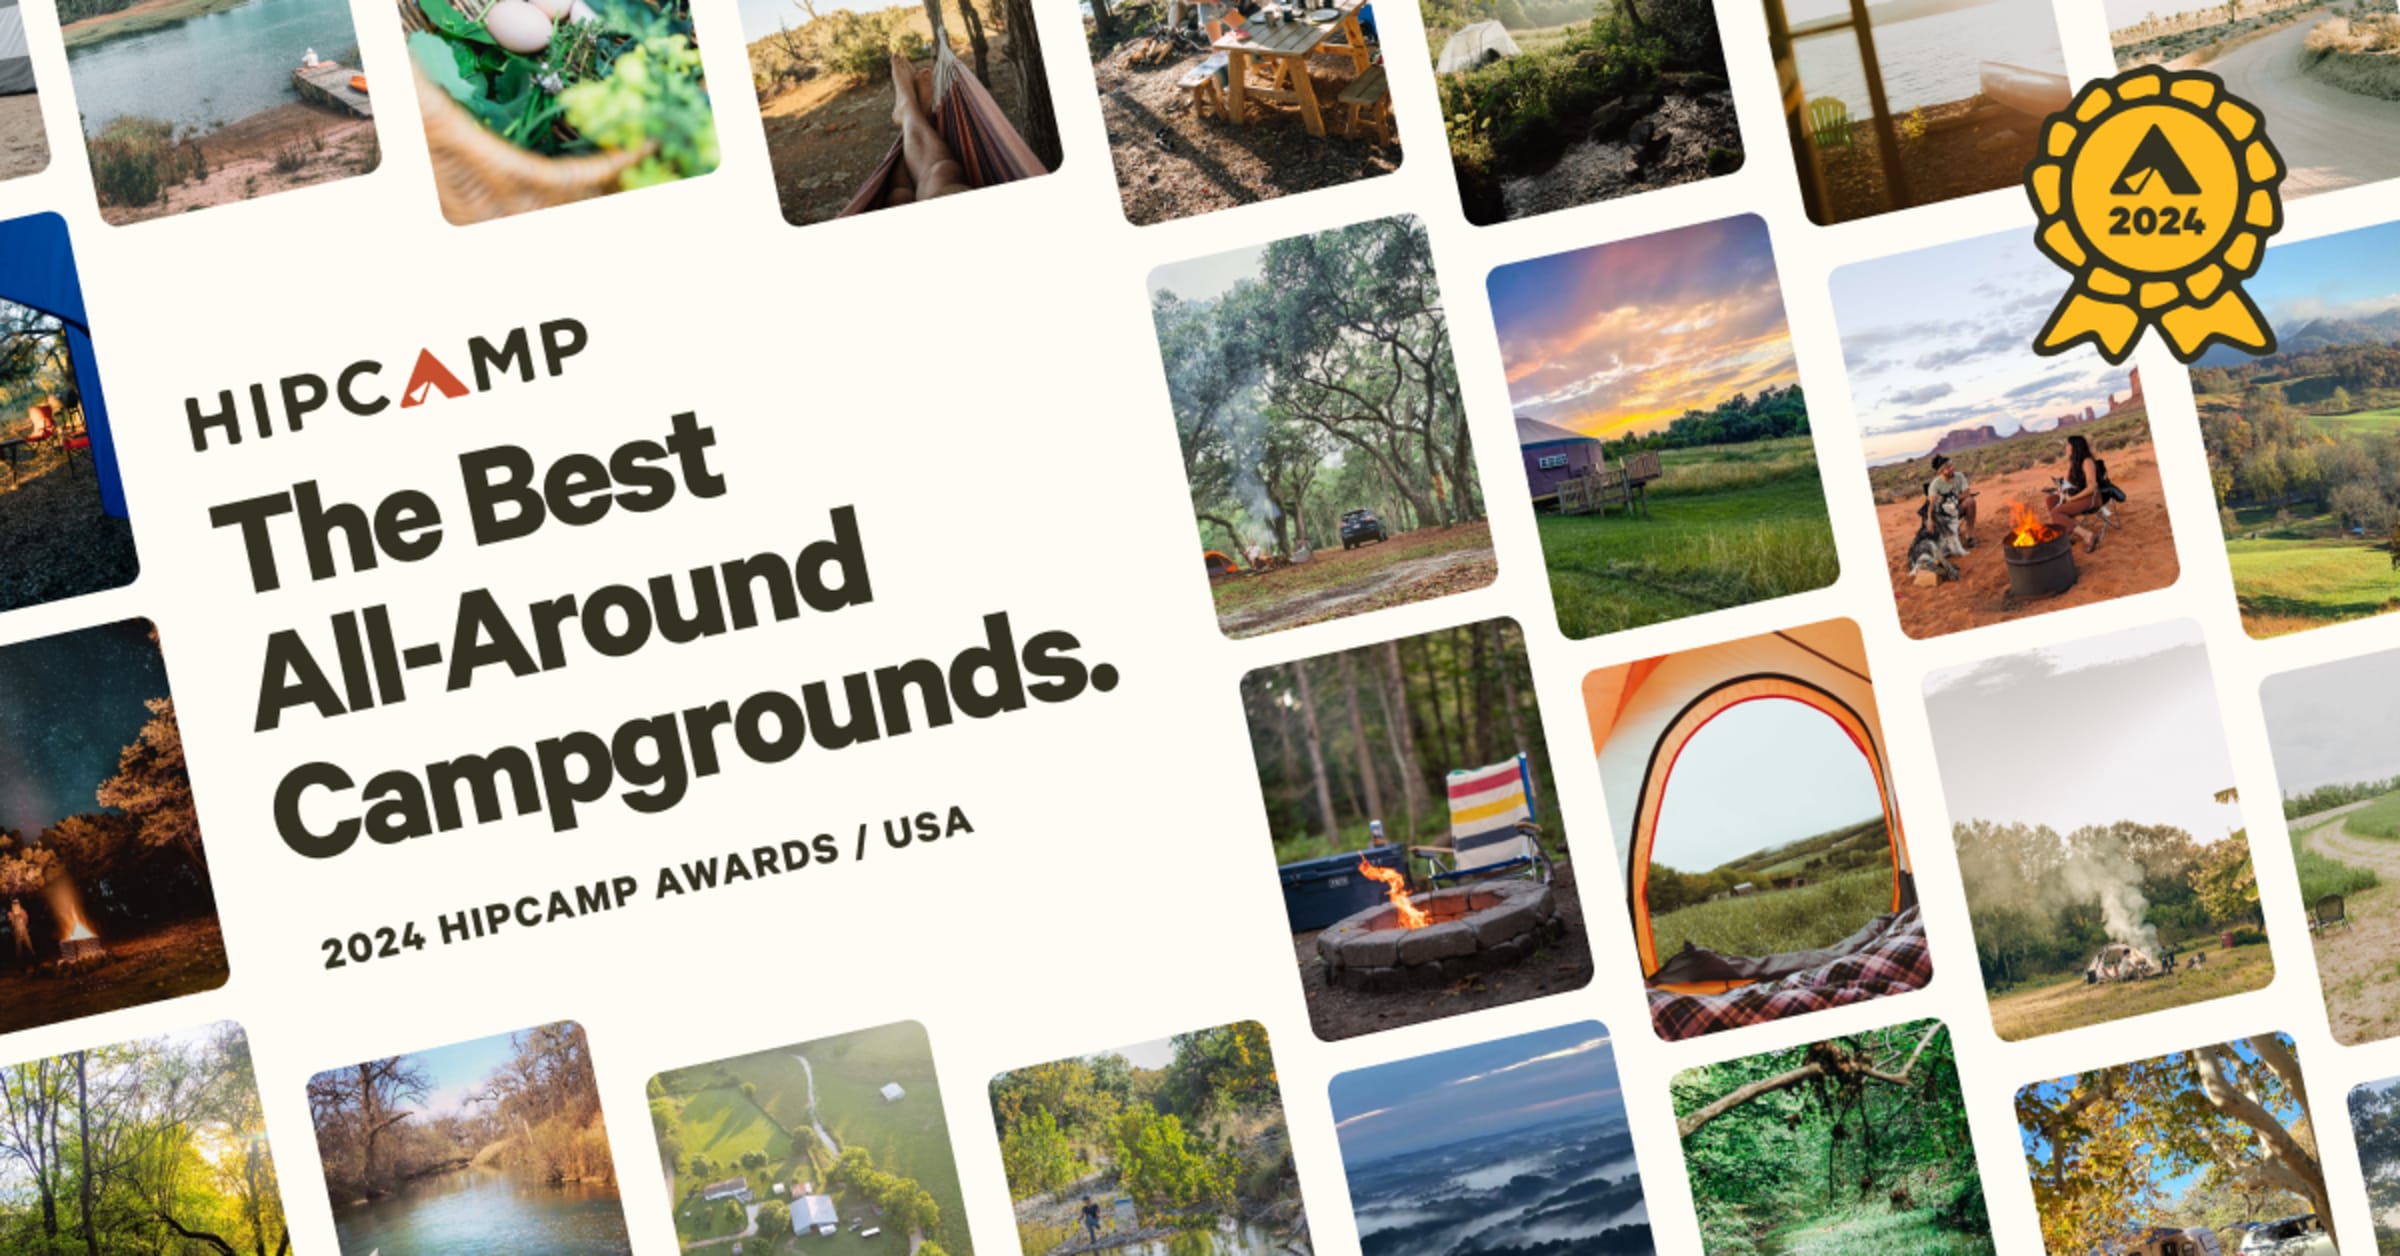 Hipcamp Awards 2024: Best All-Around Campgrounds in the US